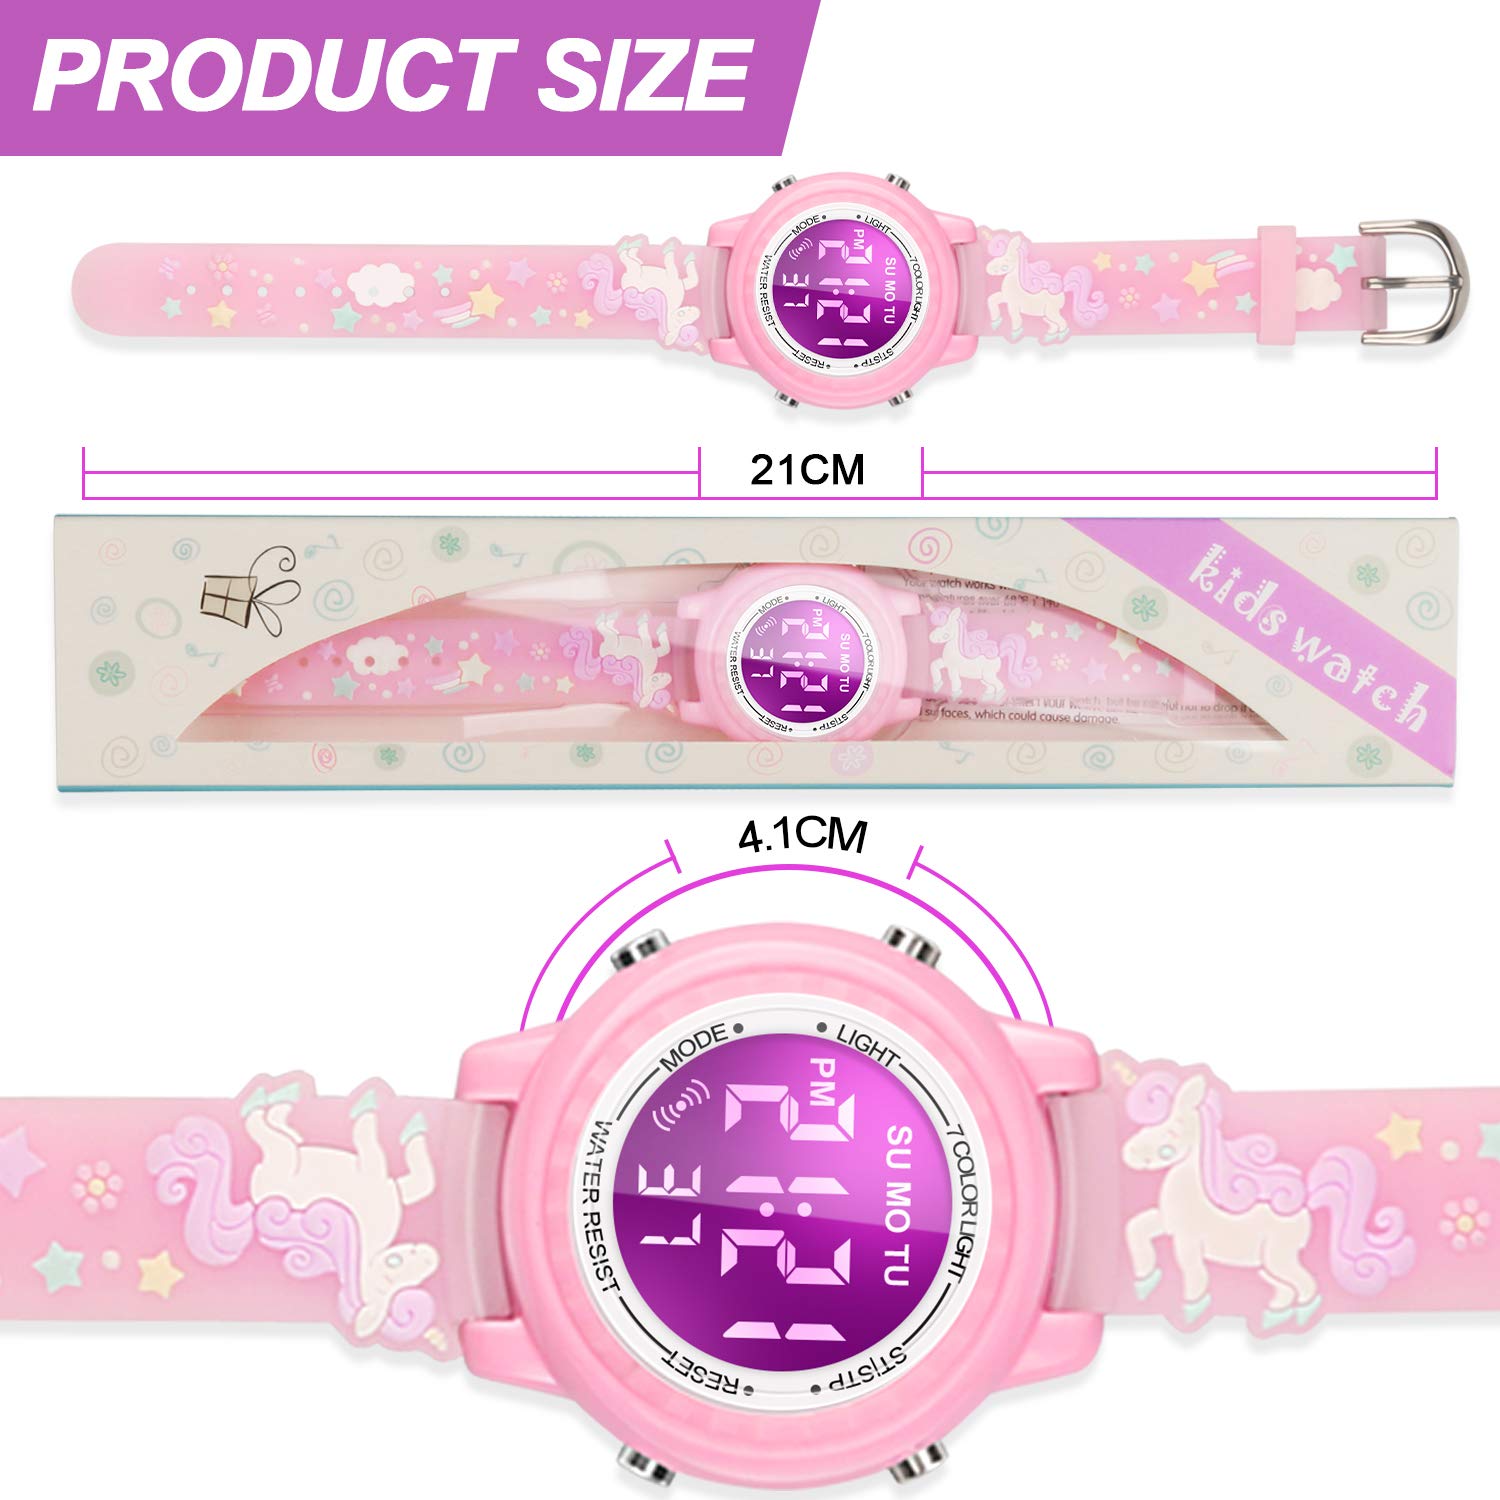 Viposoon Waterproof LED Kids Watches with Alarm - Kids Toys Gifts for Girls Age 3-10